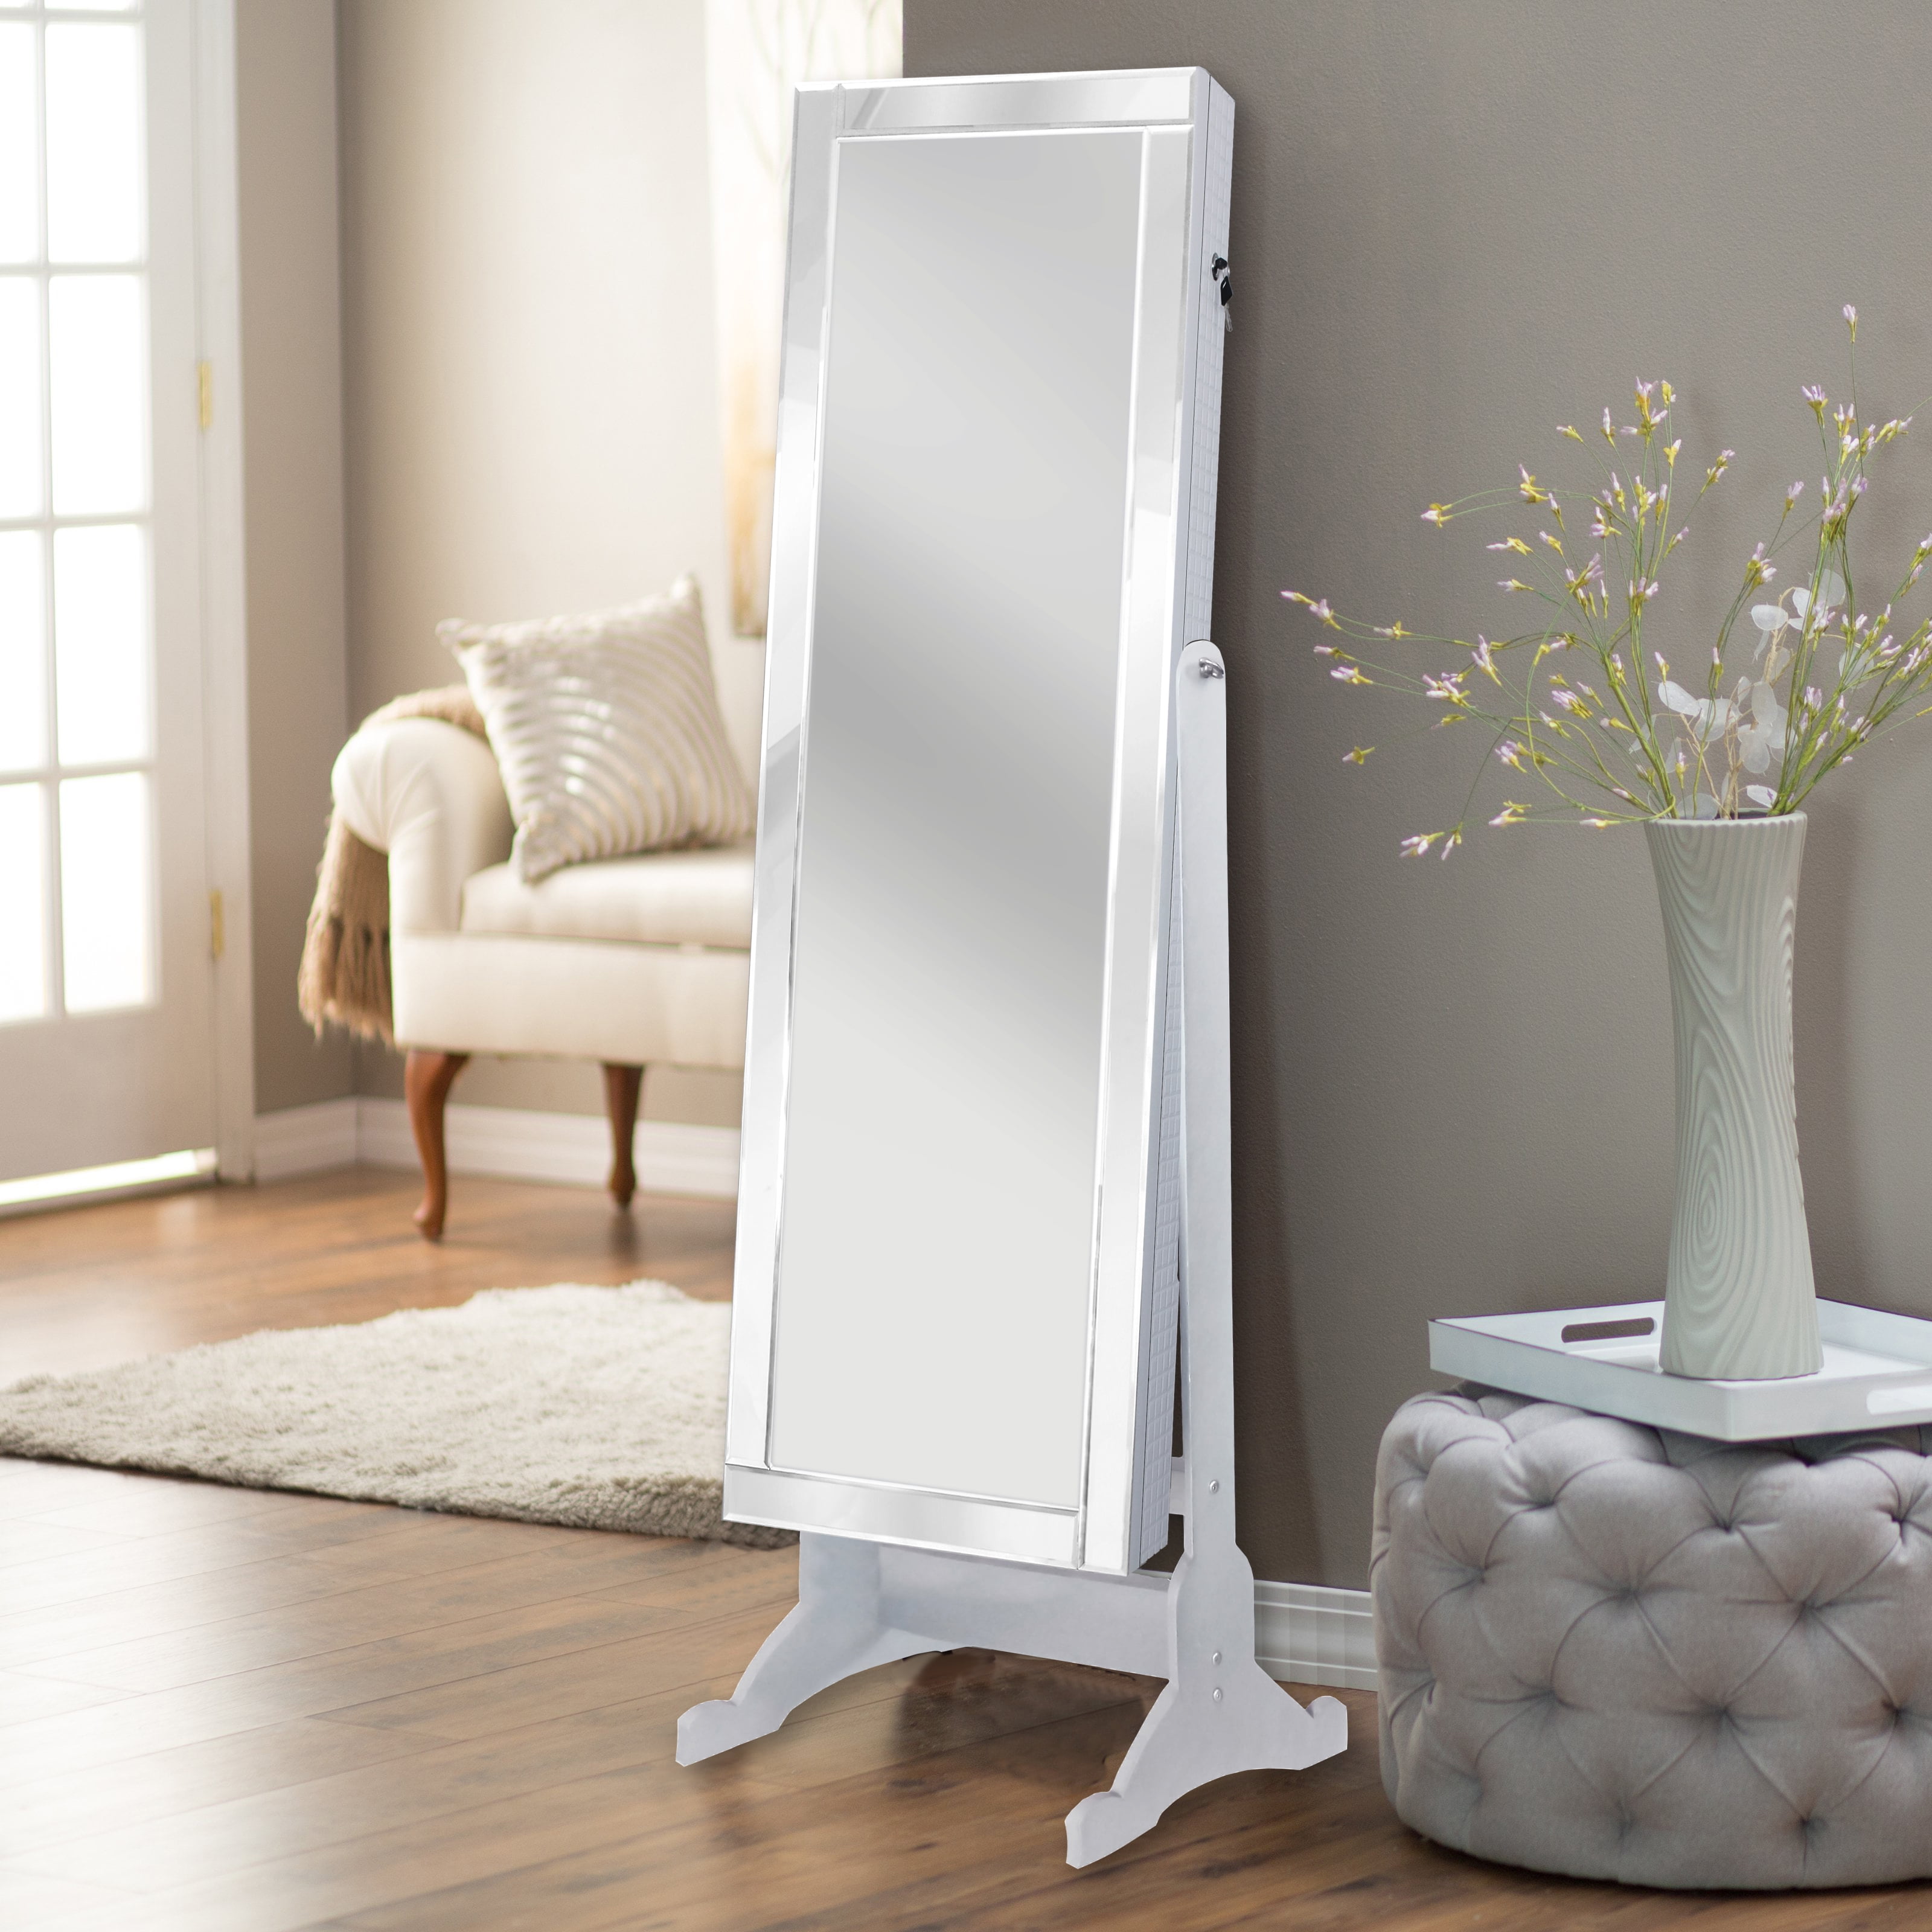 Chic Home JF62-11WE-N1-US Daze Modern Contemporary Border Rectangular Jewelry Armoire Cheval Mirror, Full-Length Pristine - White